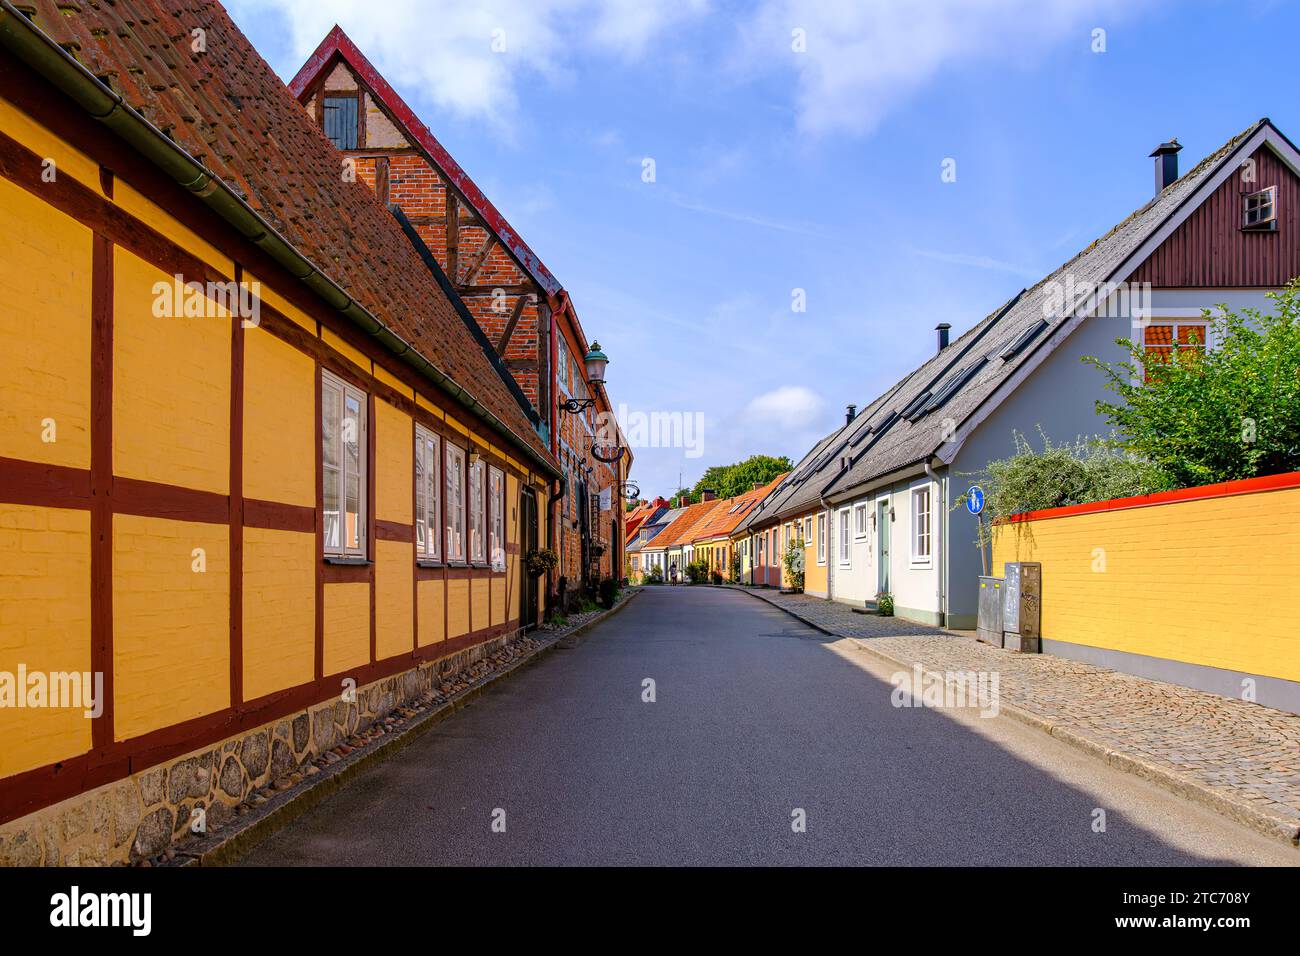 Picturesque alleyway and old town setting in Ystad, Skåne, Skane län, Sweden. Stock Photo